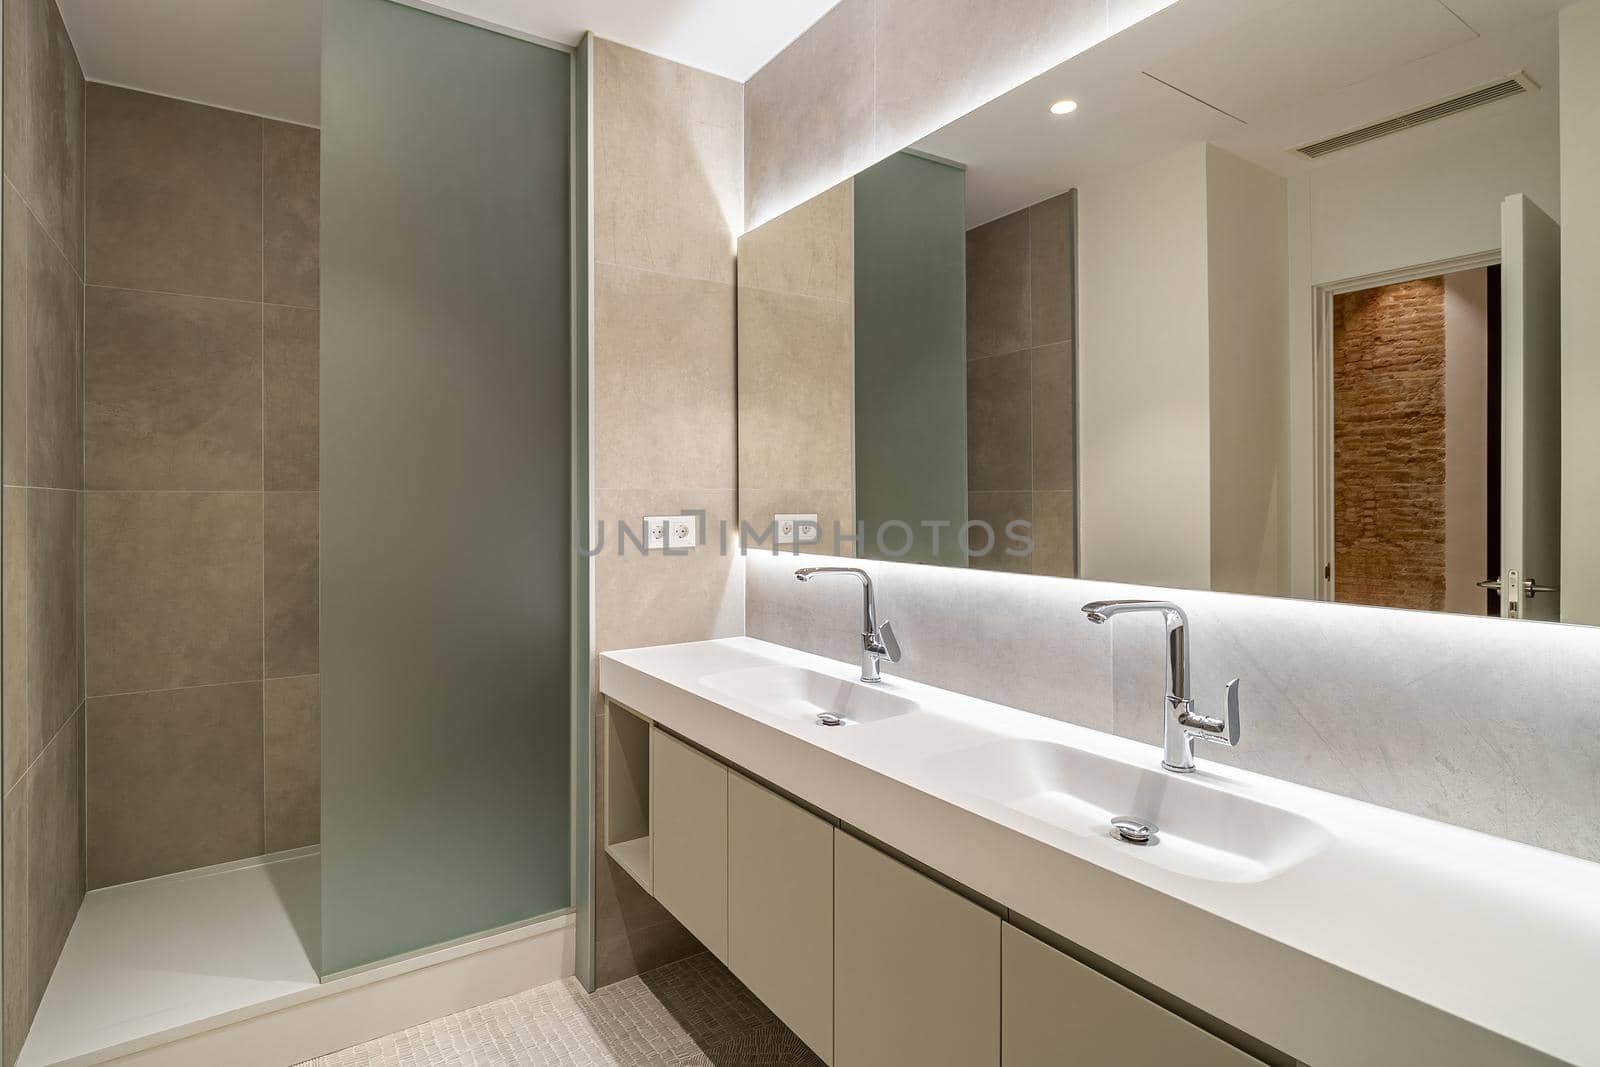 Modern tiled bathroom with a shower area, two sinks and a big wall mirror by apavlin